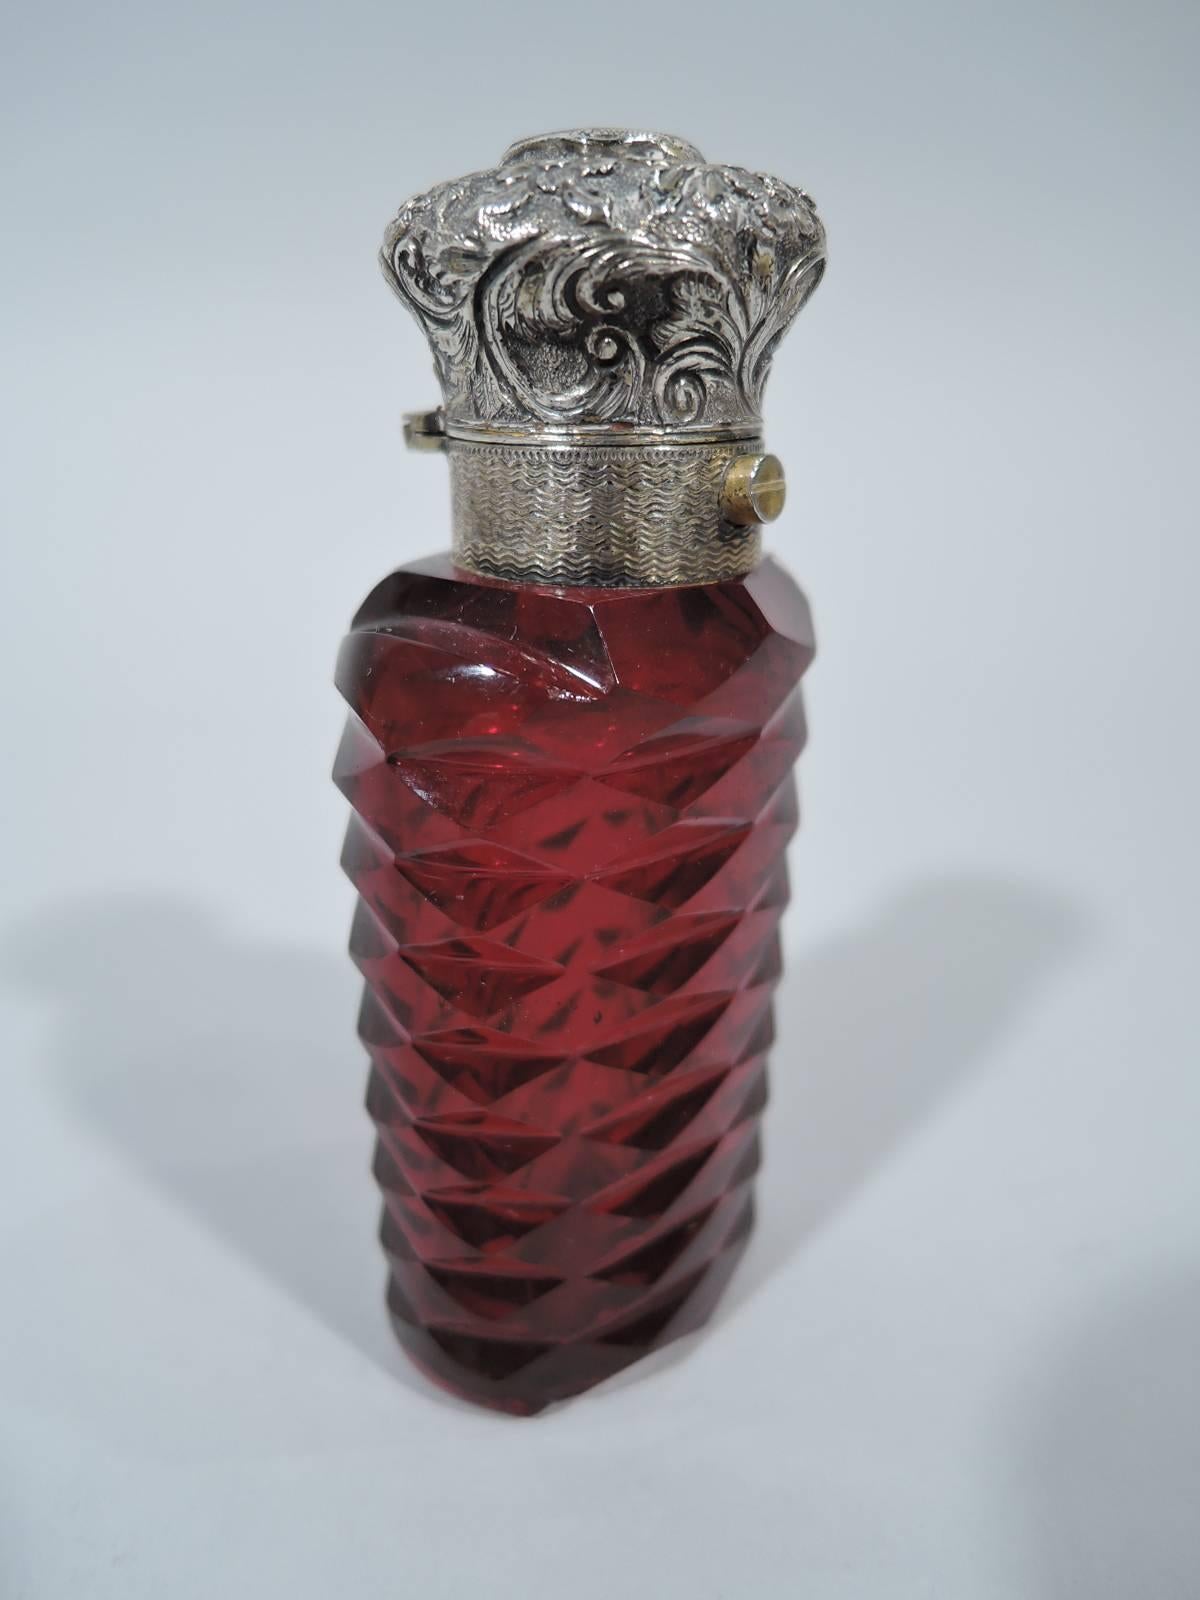 European silver and faceted ruby glass perfume, circa 1890. Ovoid with lozenge faceting. Silver collar with engine-turned wave ornament and hinged bun cover with worked flowers and applied cartouche (vacant). Glass is deep red. Unmarked.